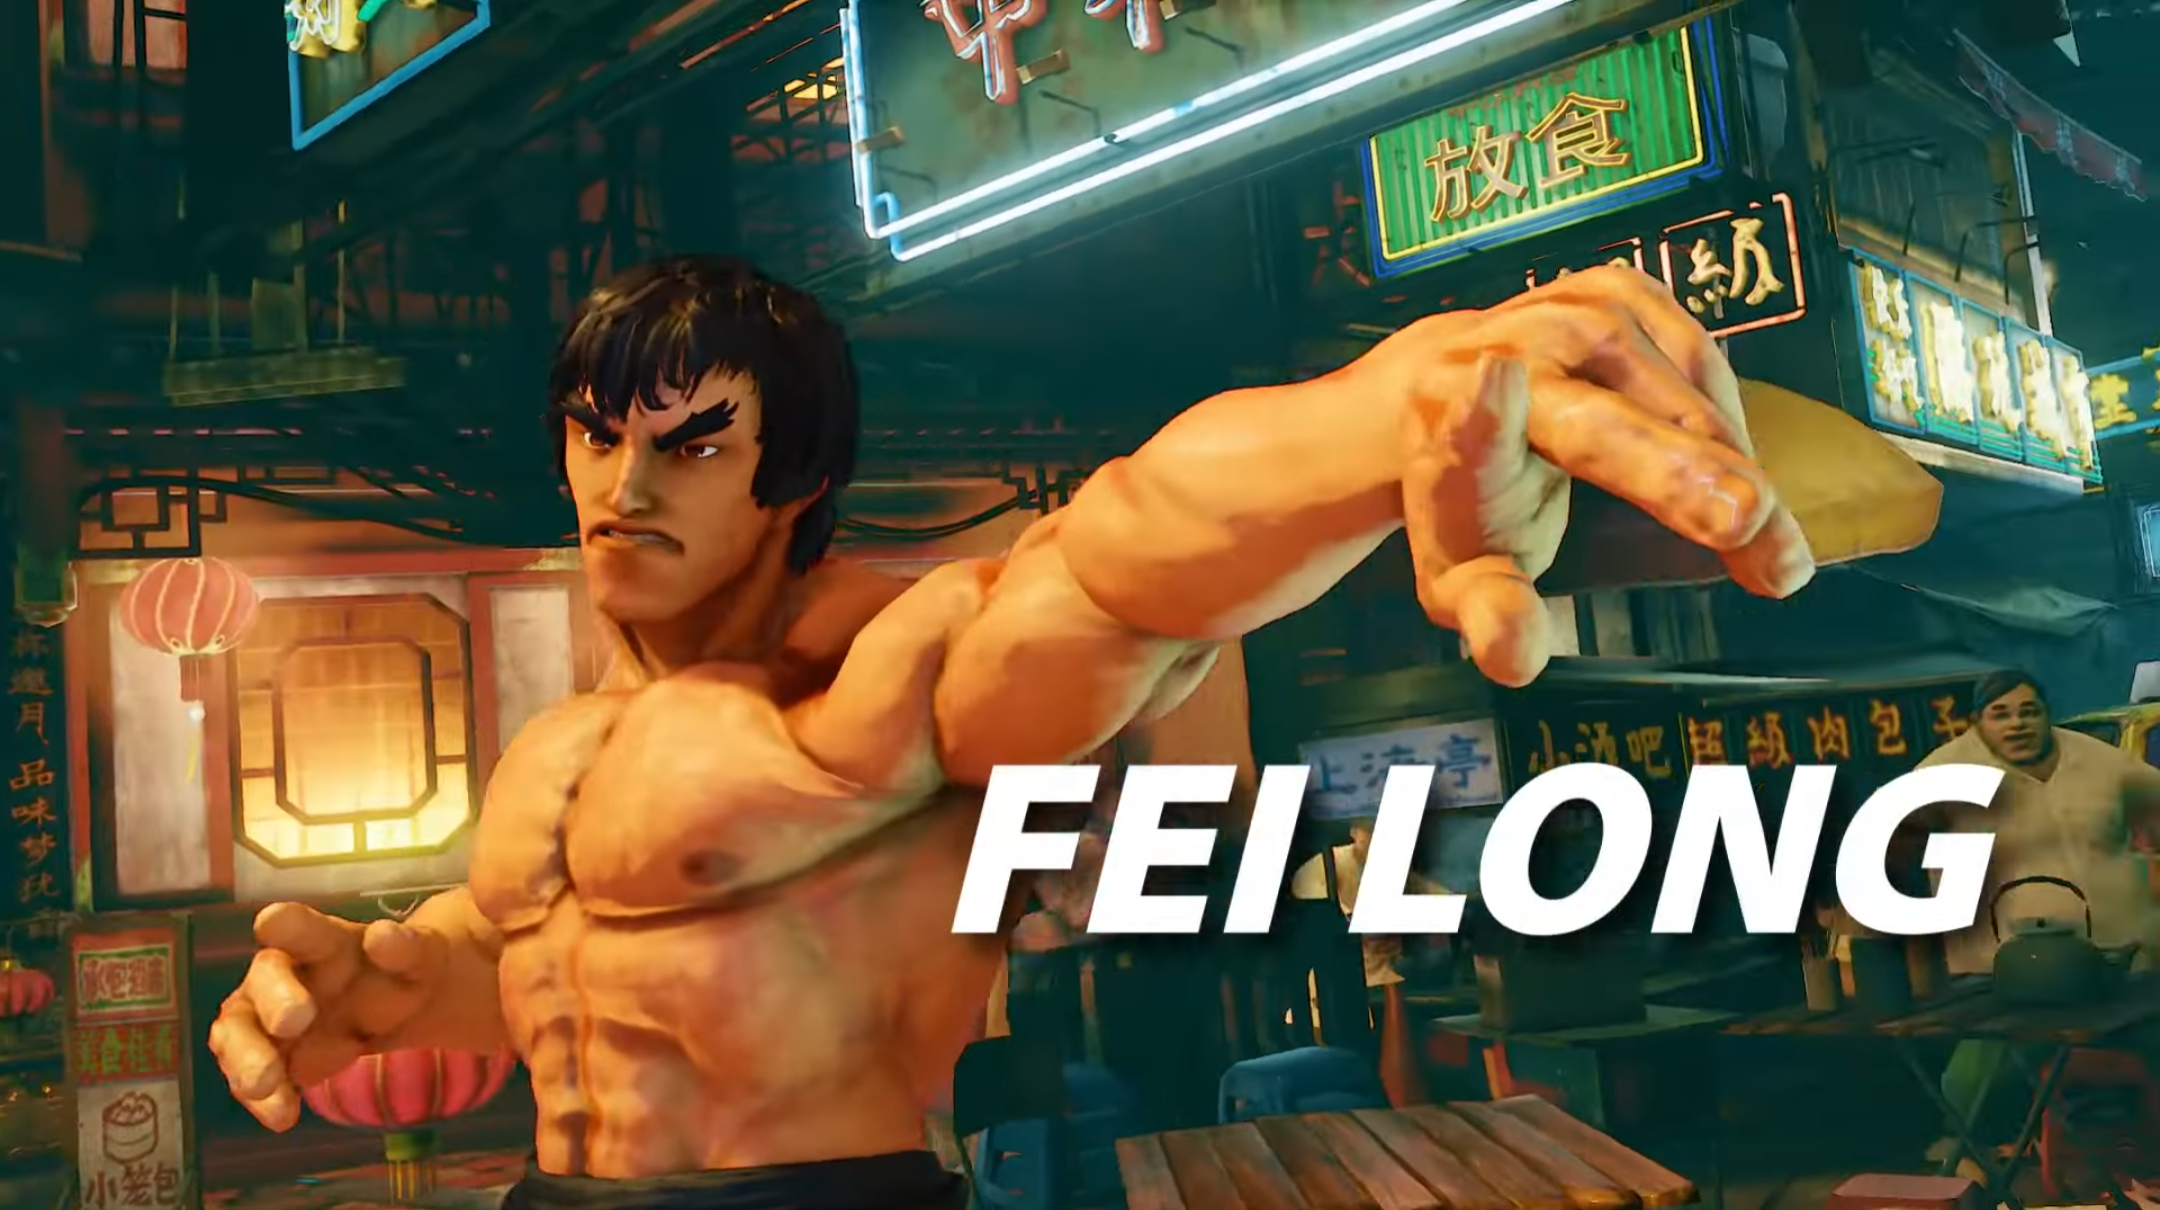 Image for Fei Long returns in Street Fighter 5 - as an incredible fan-made mod